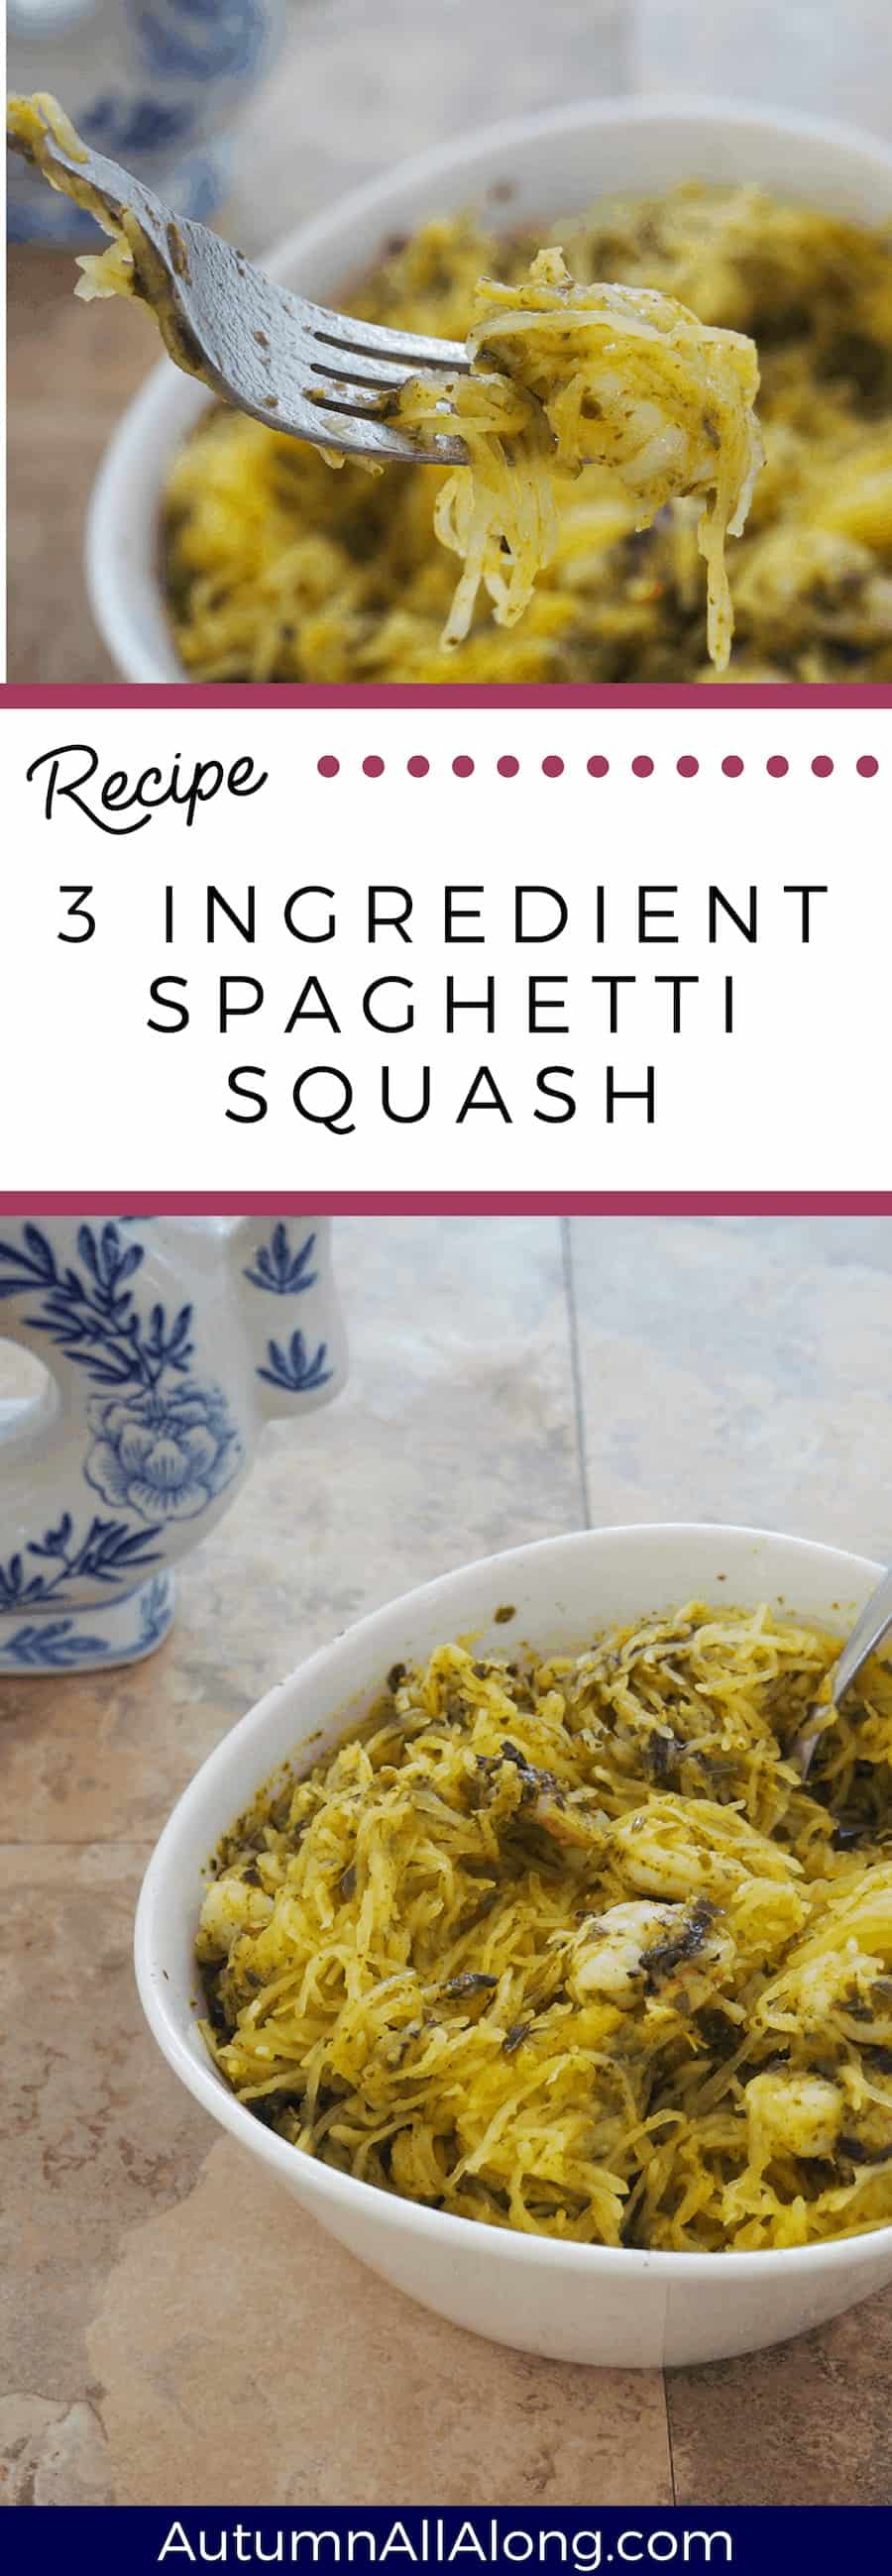 This 3 ingredient spaghetti squash recipe is as easy to make as it is delicious! You can use it as a base or just be surprised by how yummy it is by itself! | via Autumn All Along